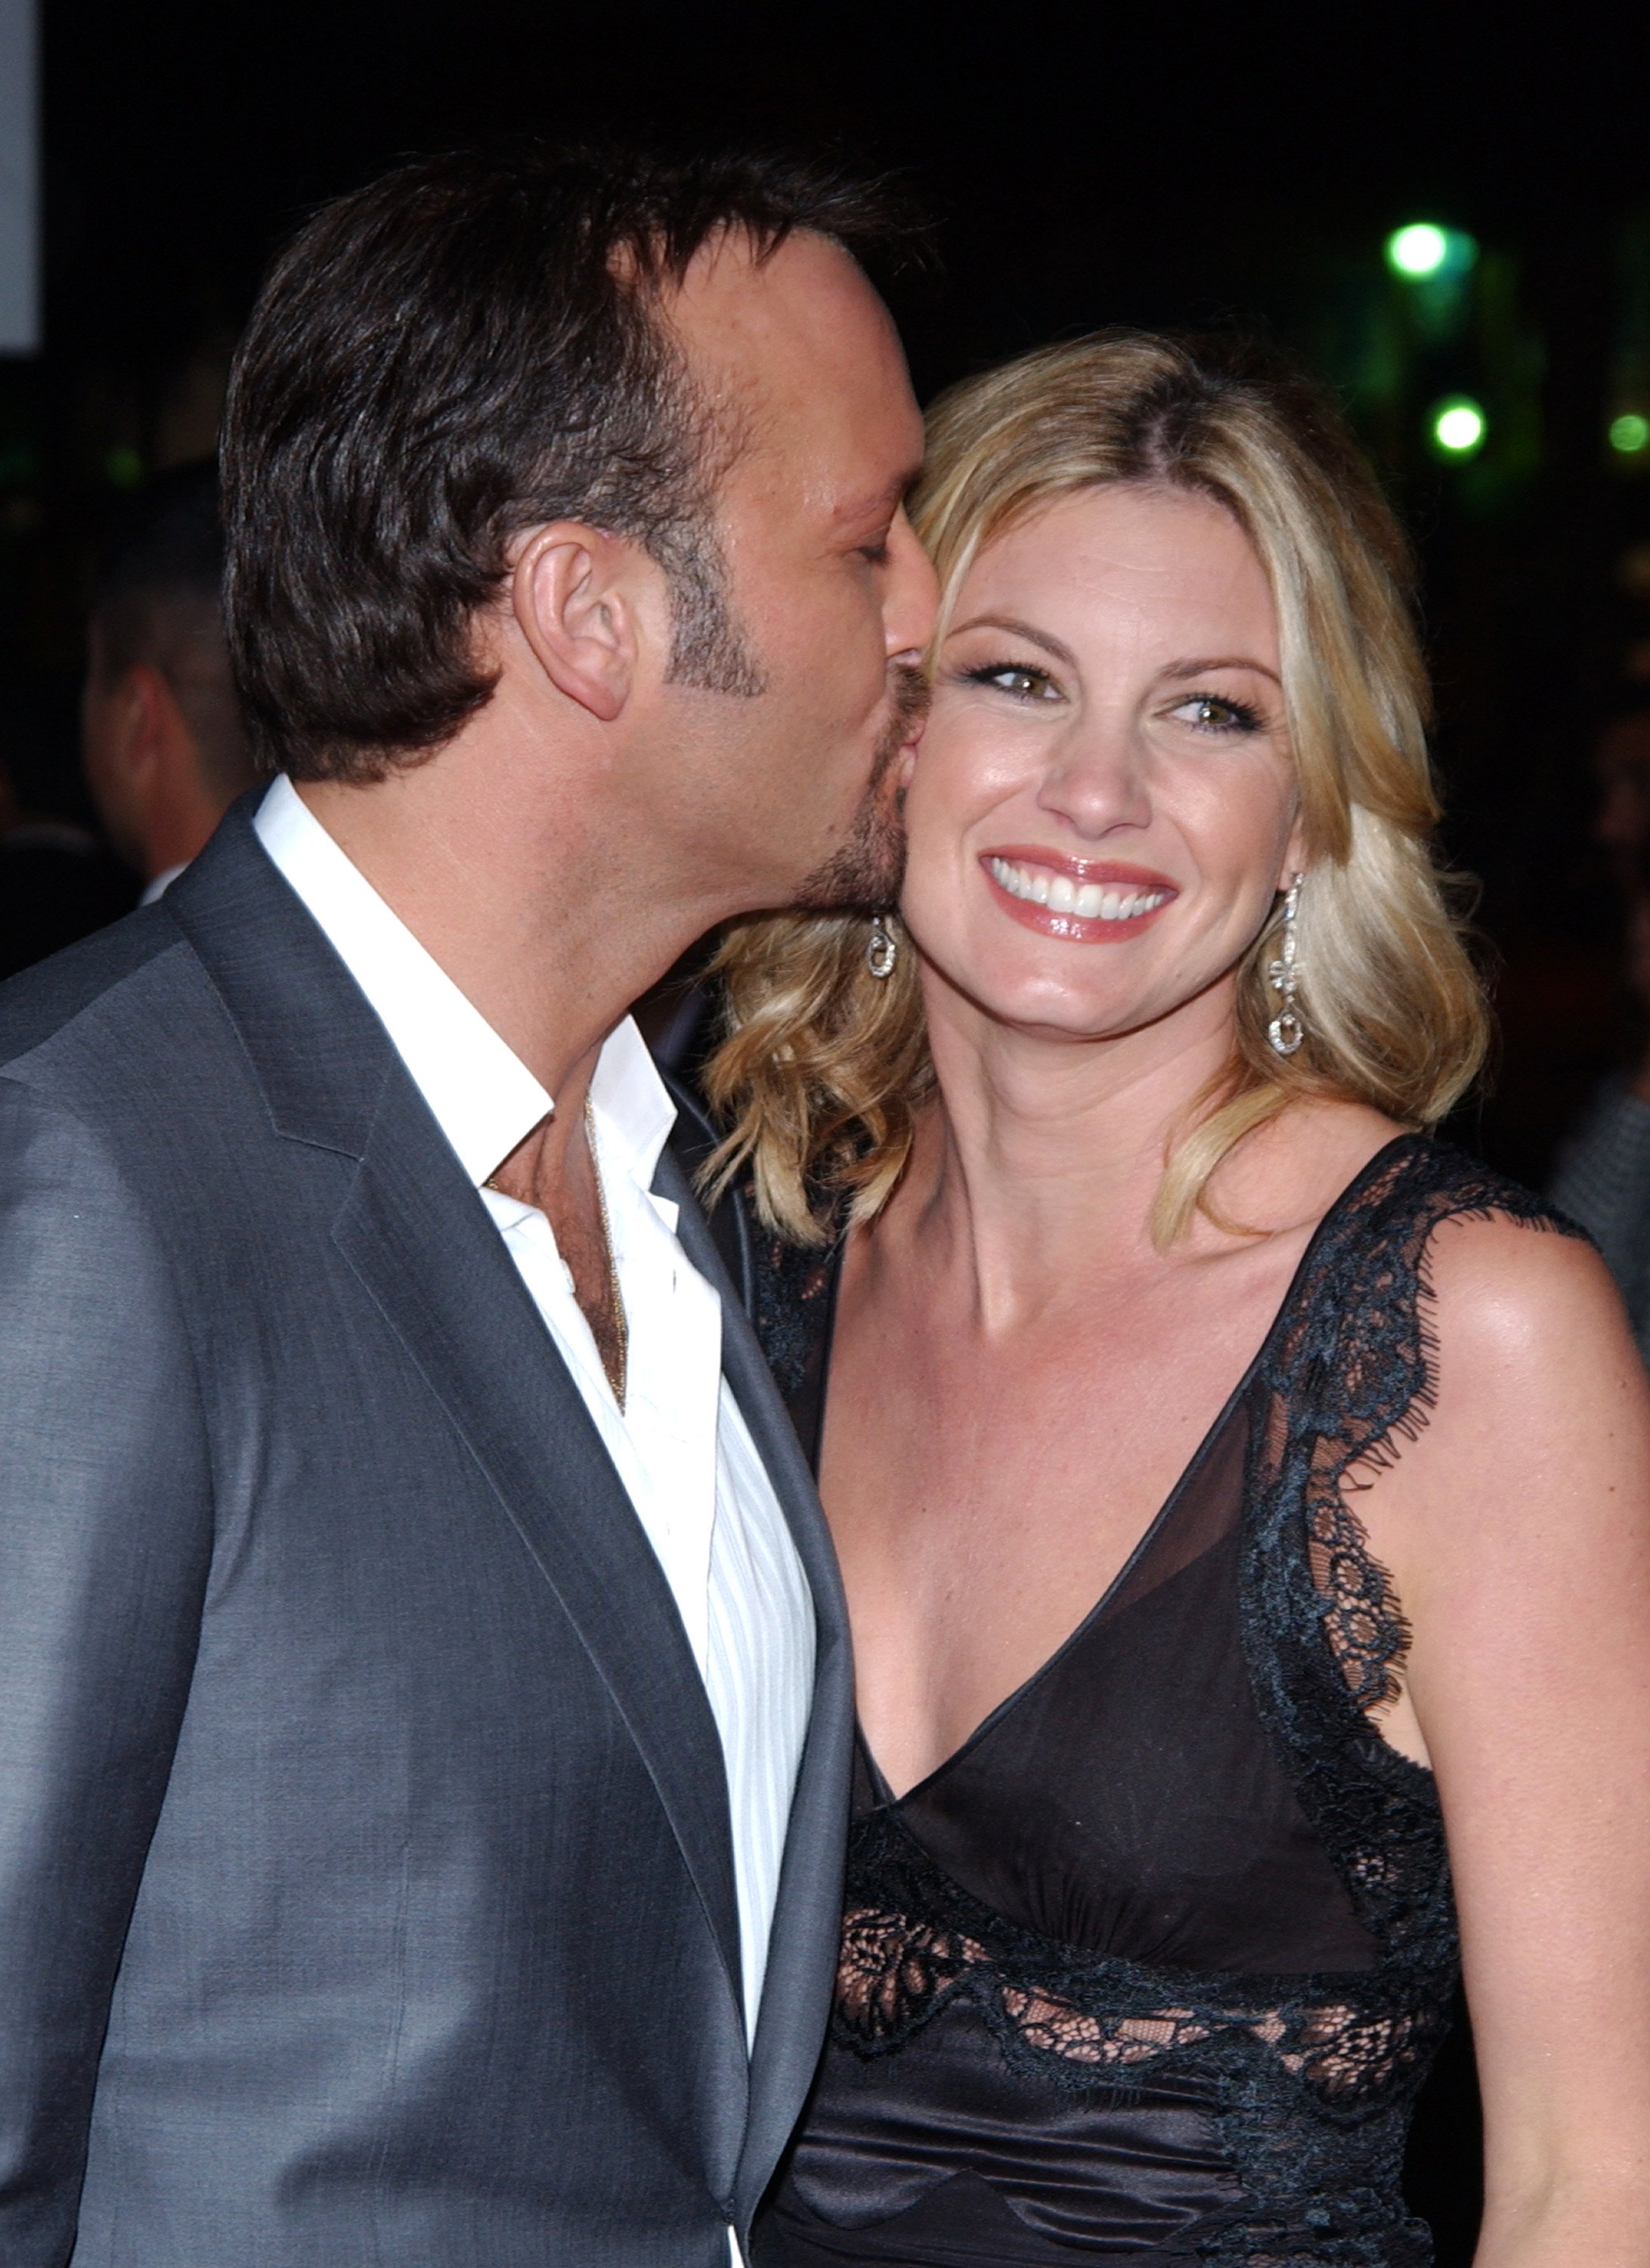 Tim McGraw and wife Faith Hill during "Friday Night Lights" - World Premiere at Grauman's Chinese Theatre in Hollywood, California, United States. | Source: Getty Images